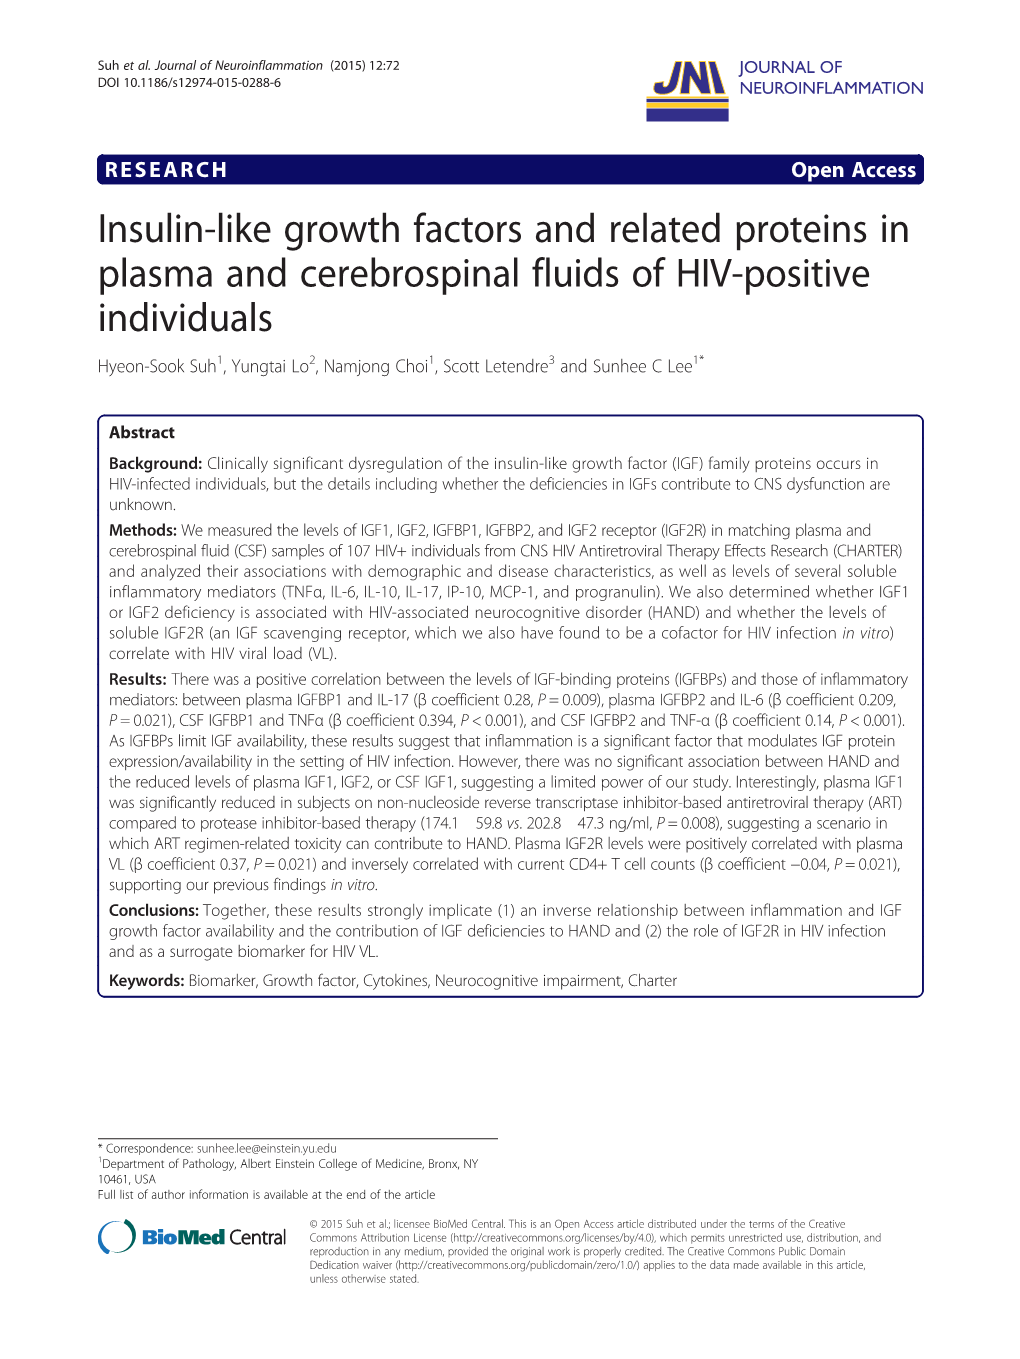 Insulin-Like Growth Factors and Related Proteins in Plasma And